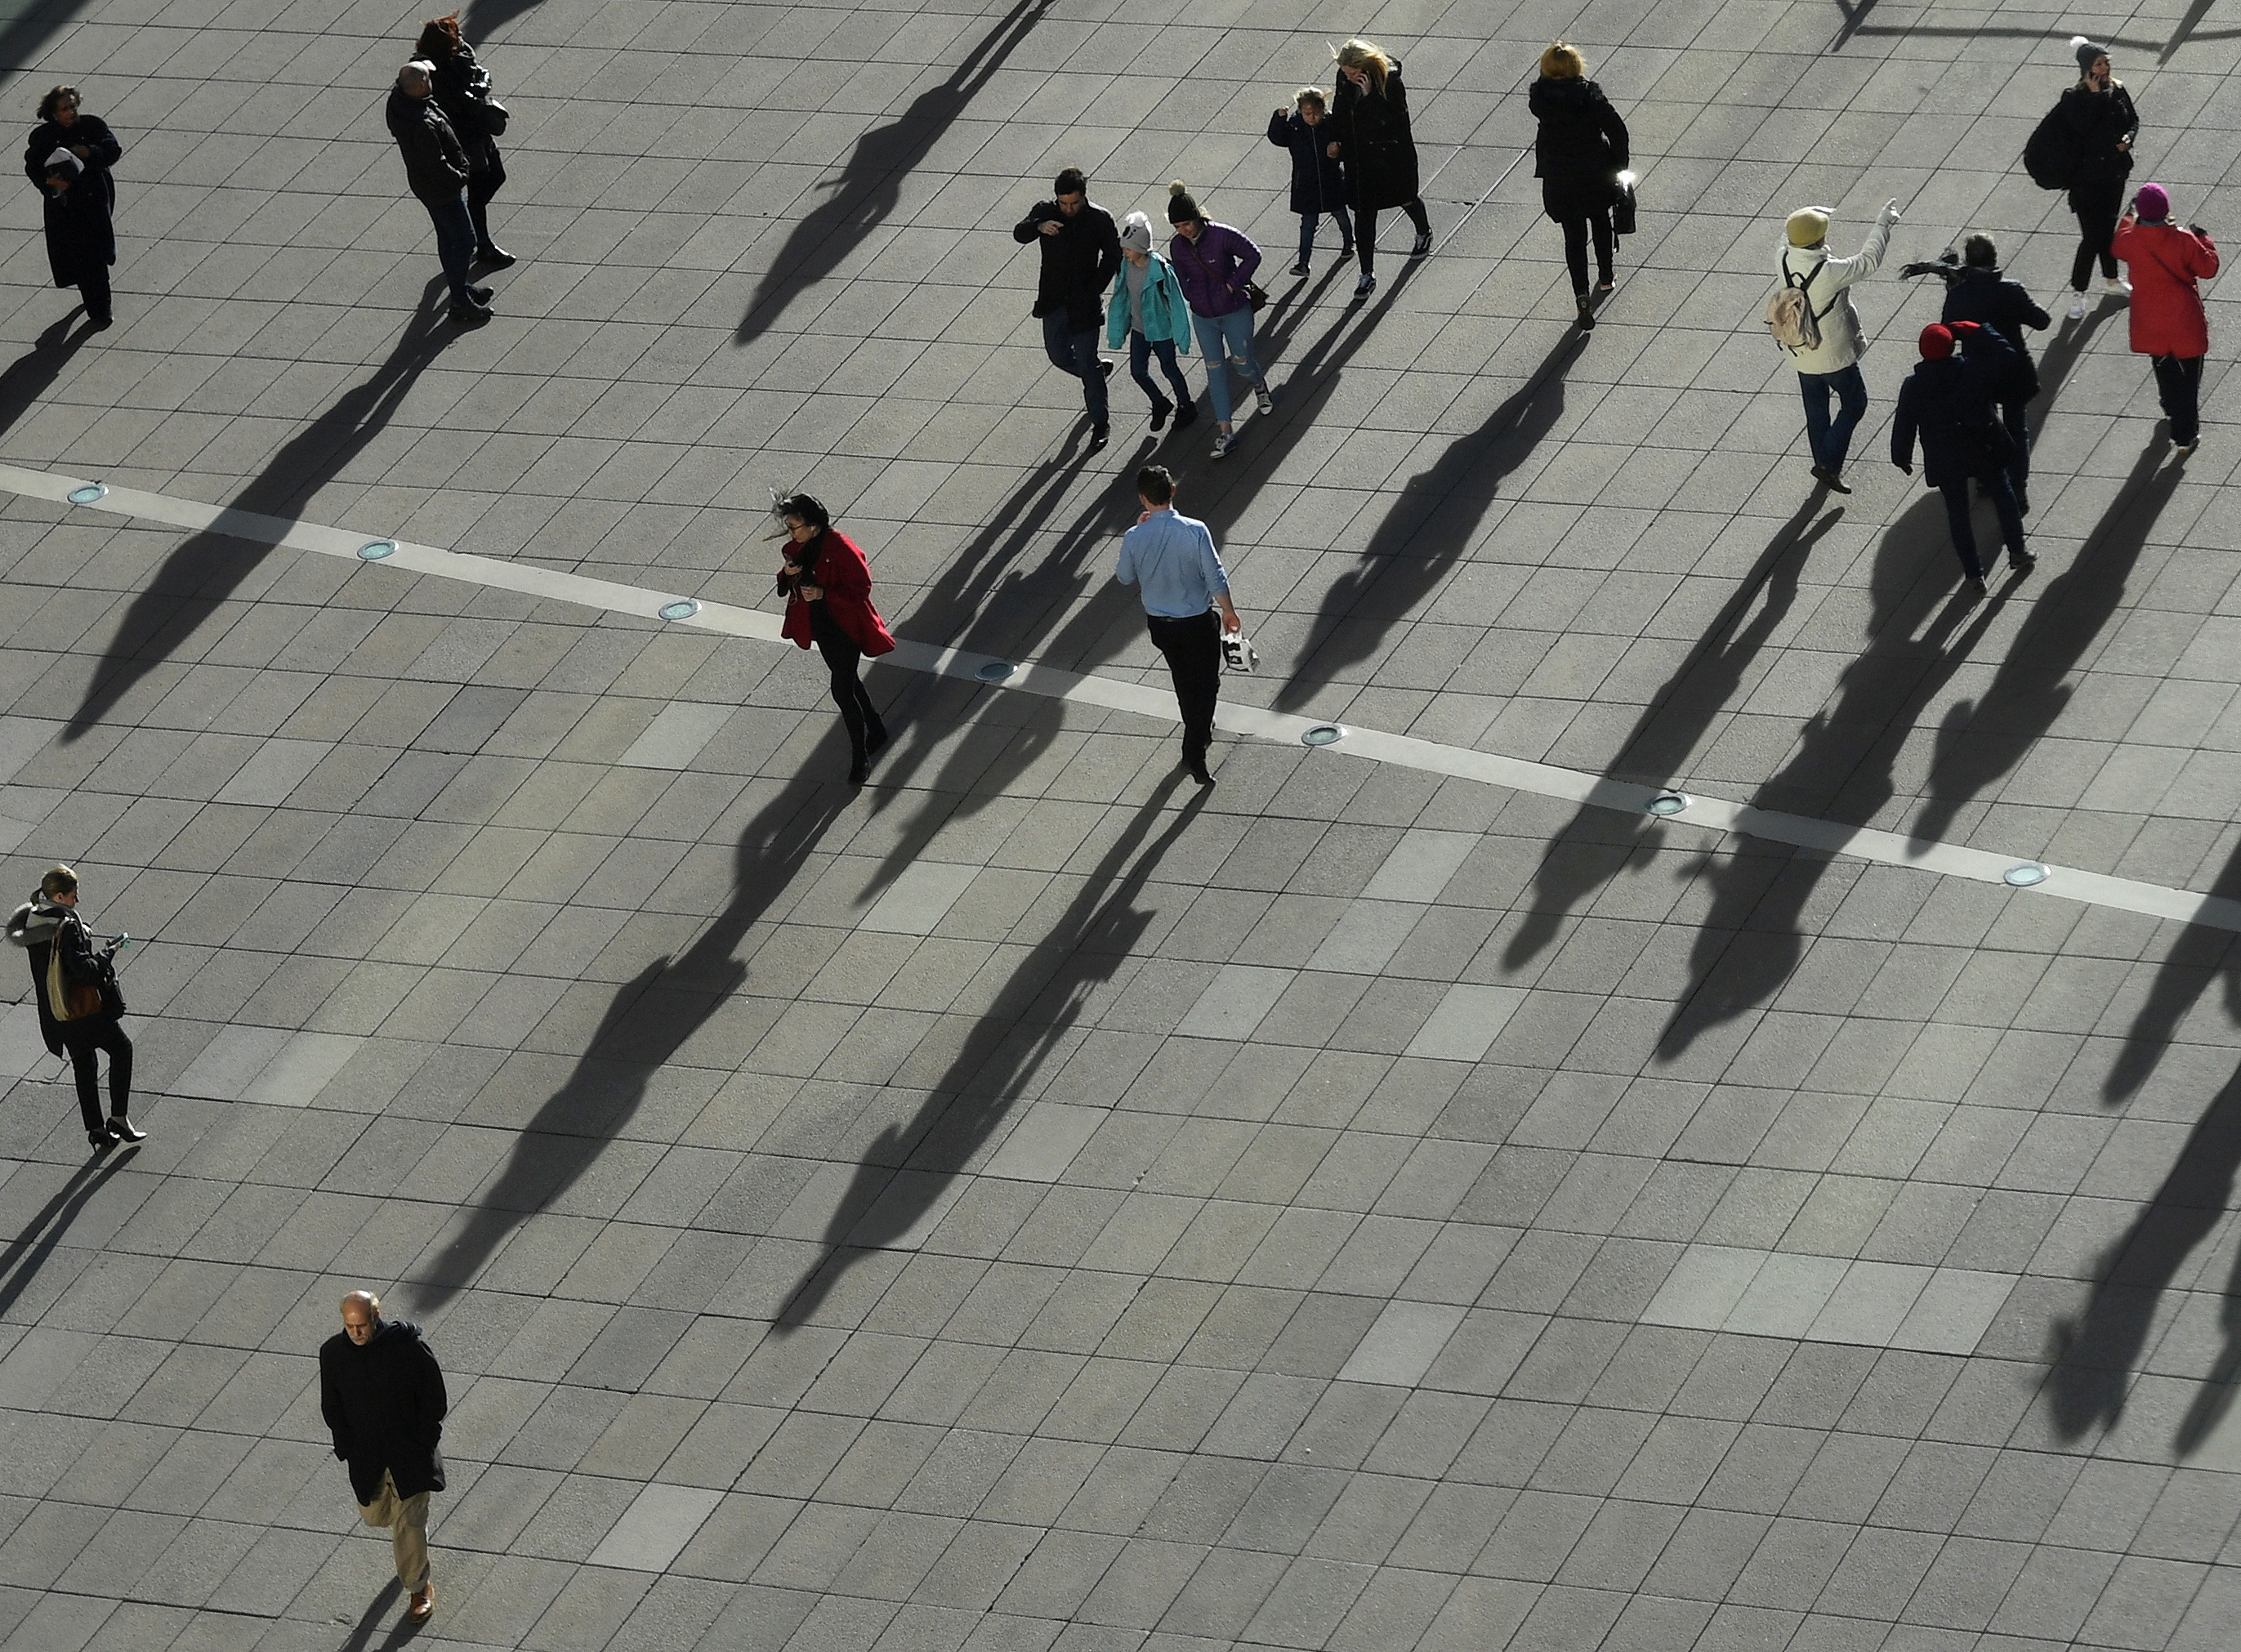 People cast long shadows in the winter sunlight as they walk across a plaza in the Canary Wharf financial district of London